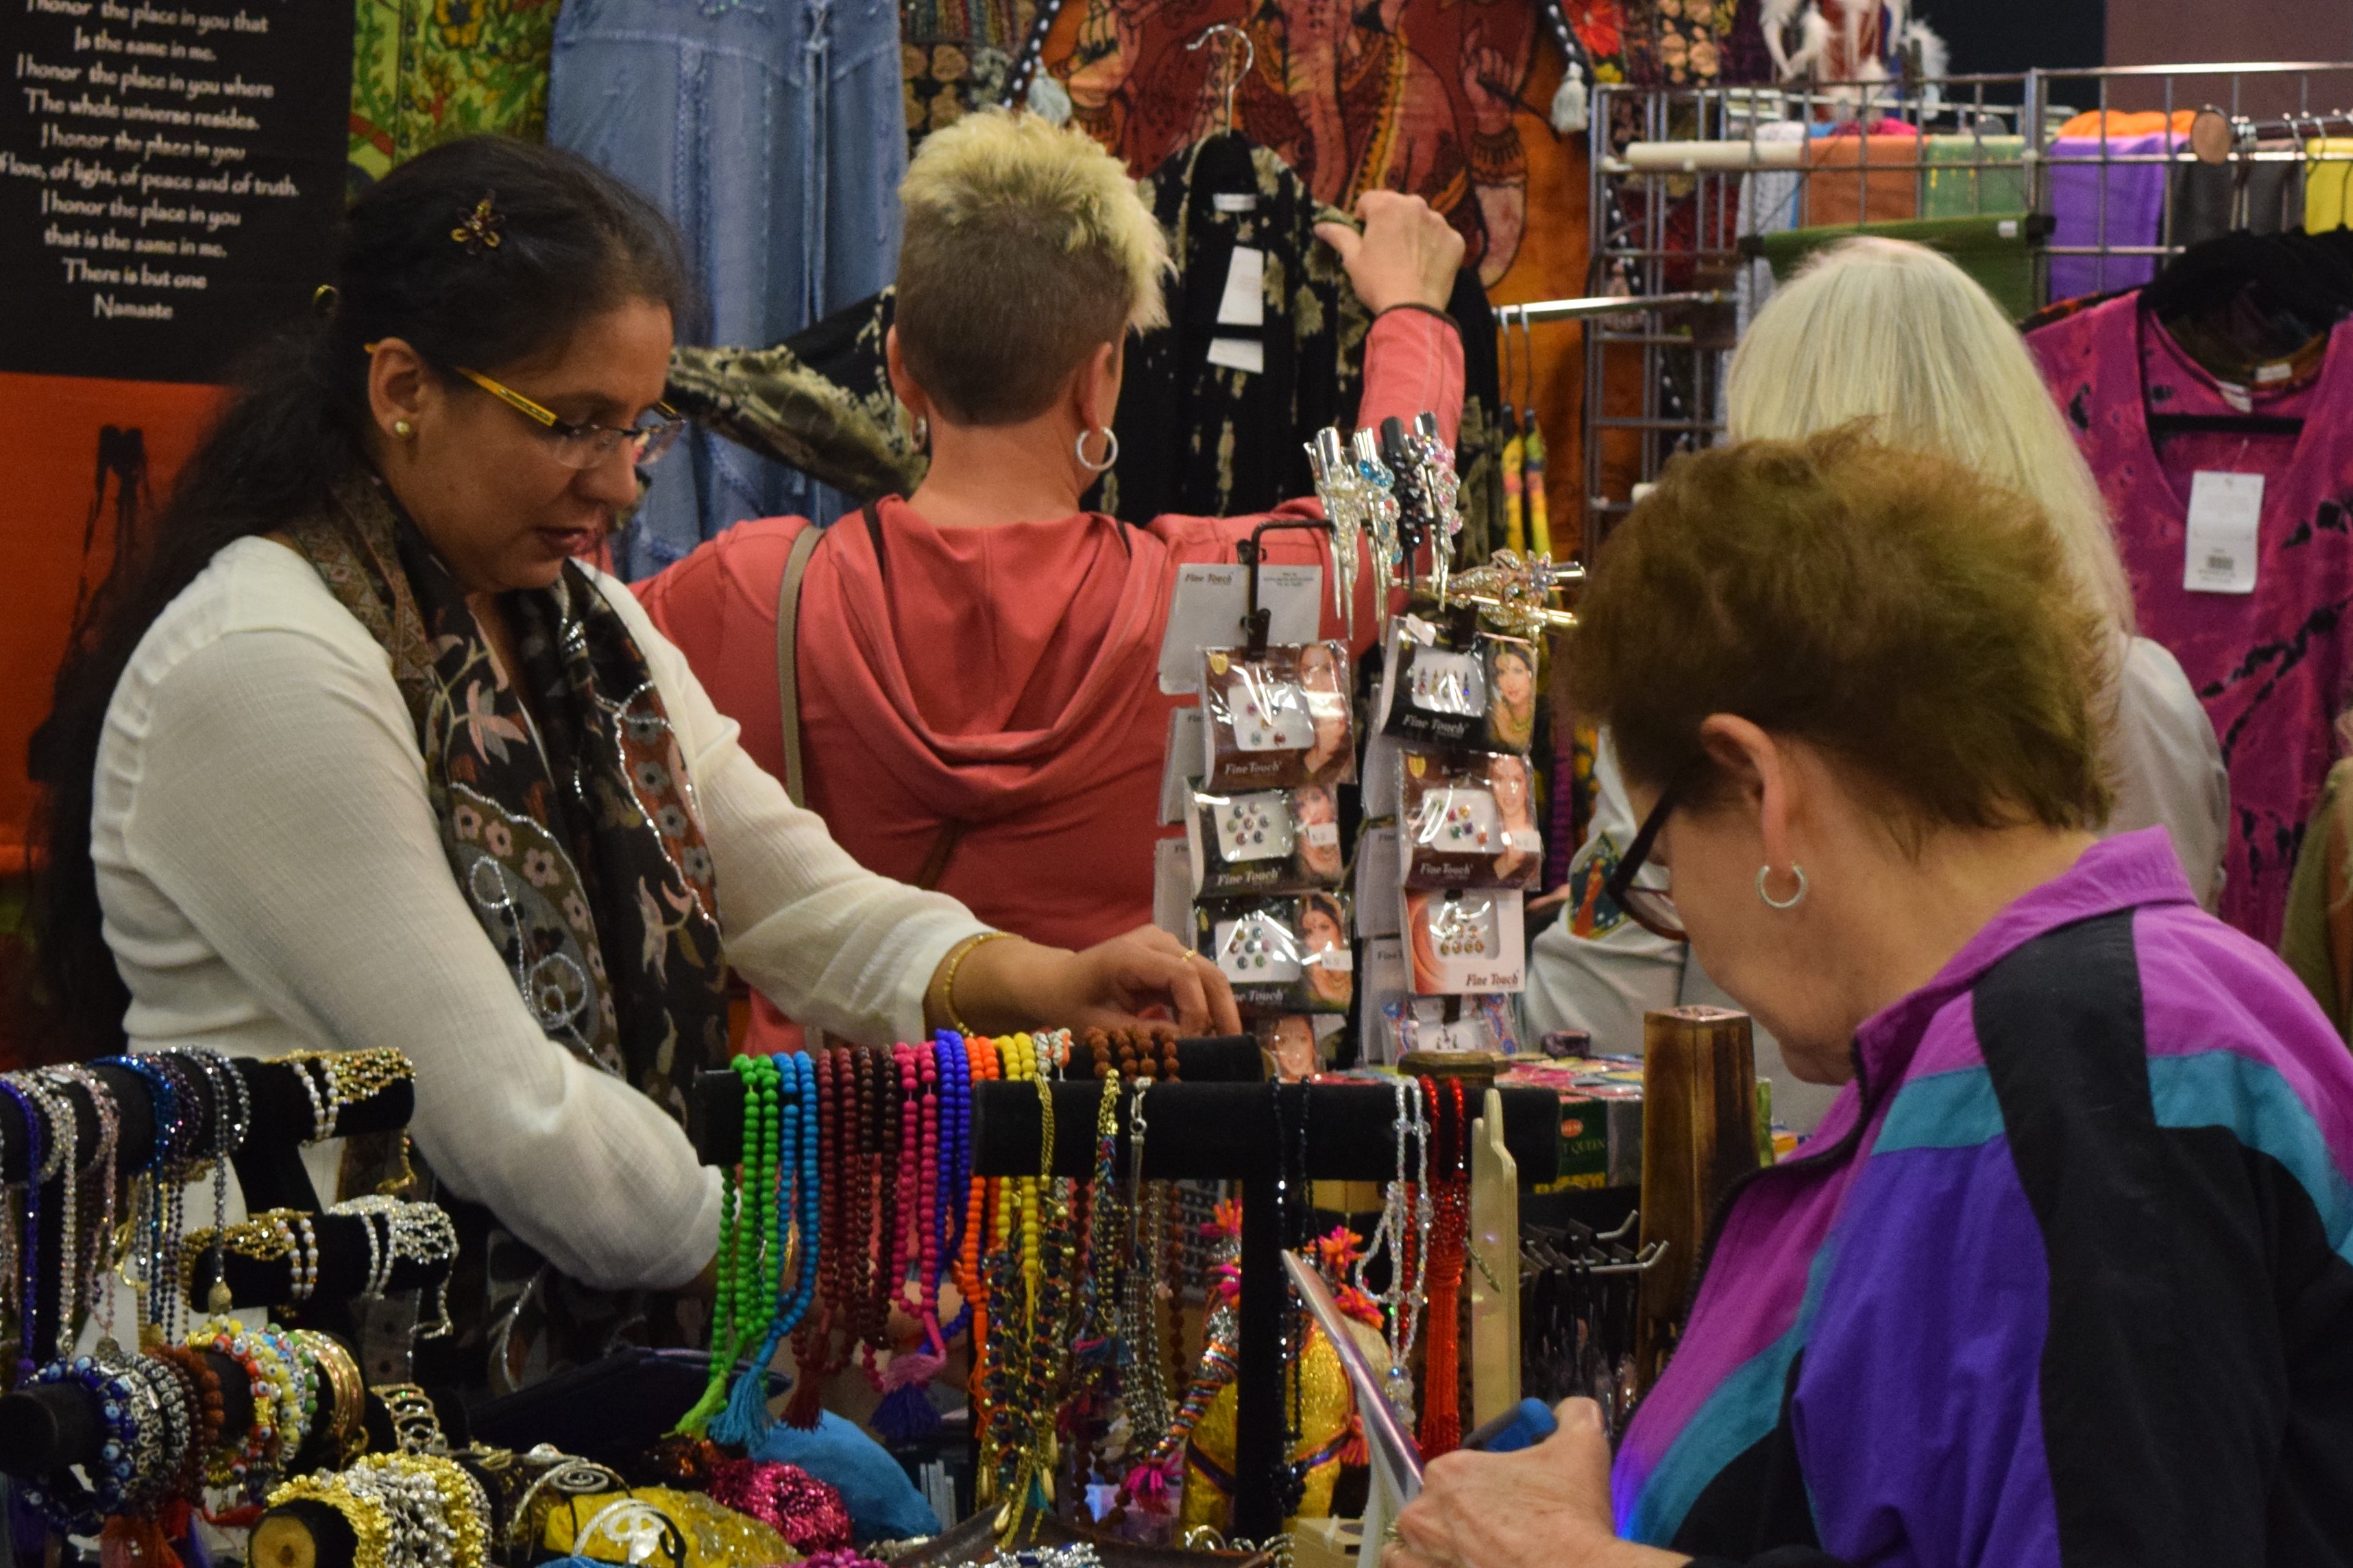 Exotic, colorful clothing, scarves, jewelry and lighting make VOL a shopper's paradise.